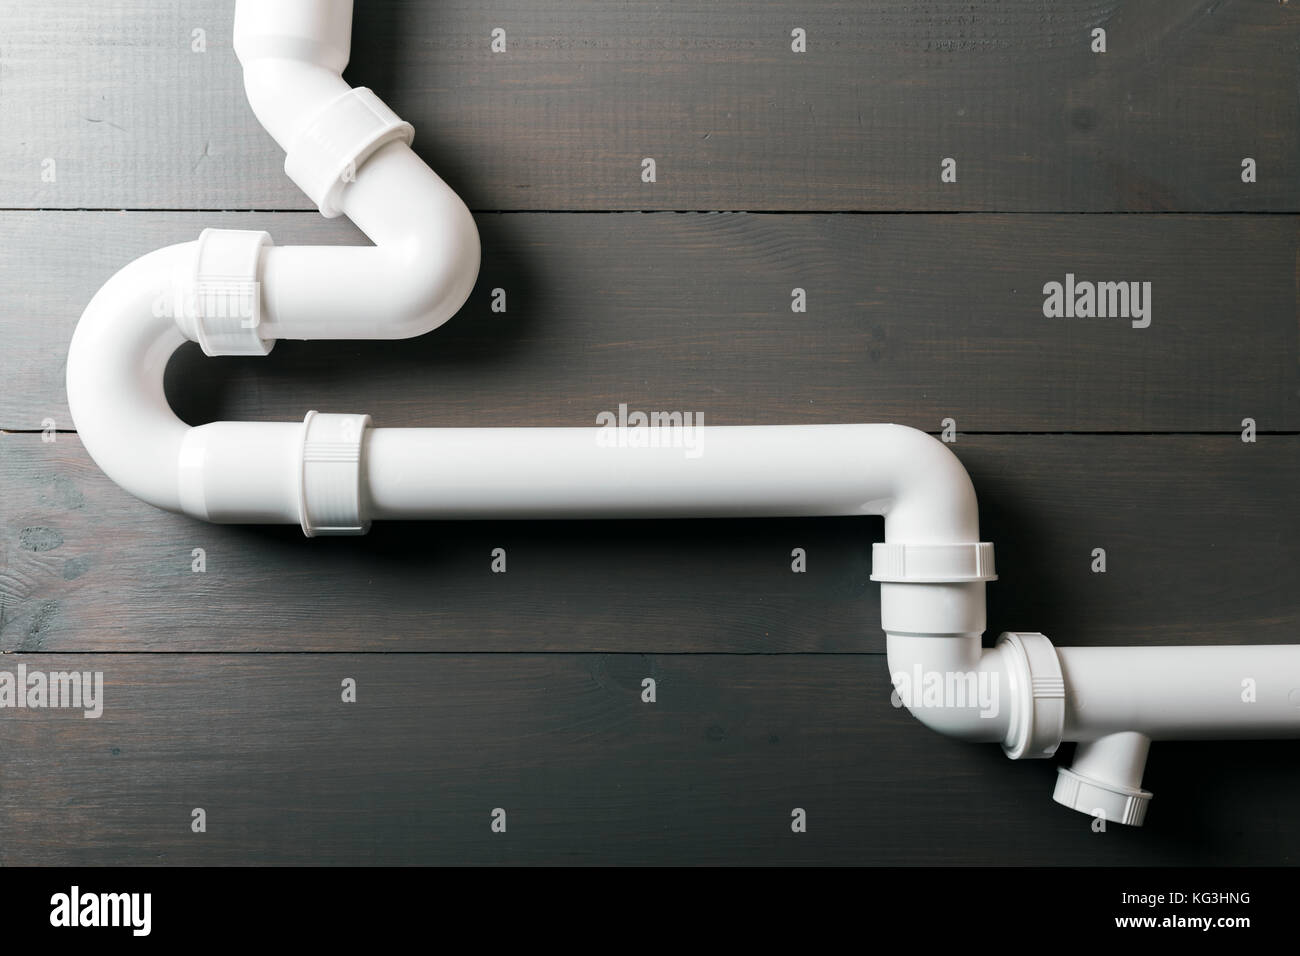 white plastic sewerage water pipes Stock Photo